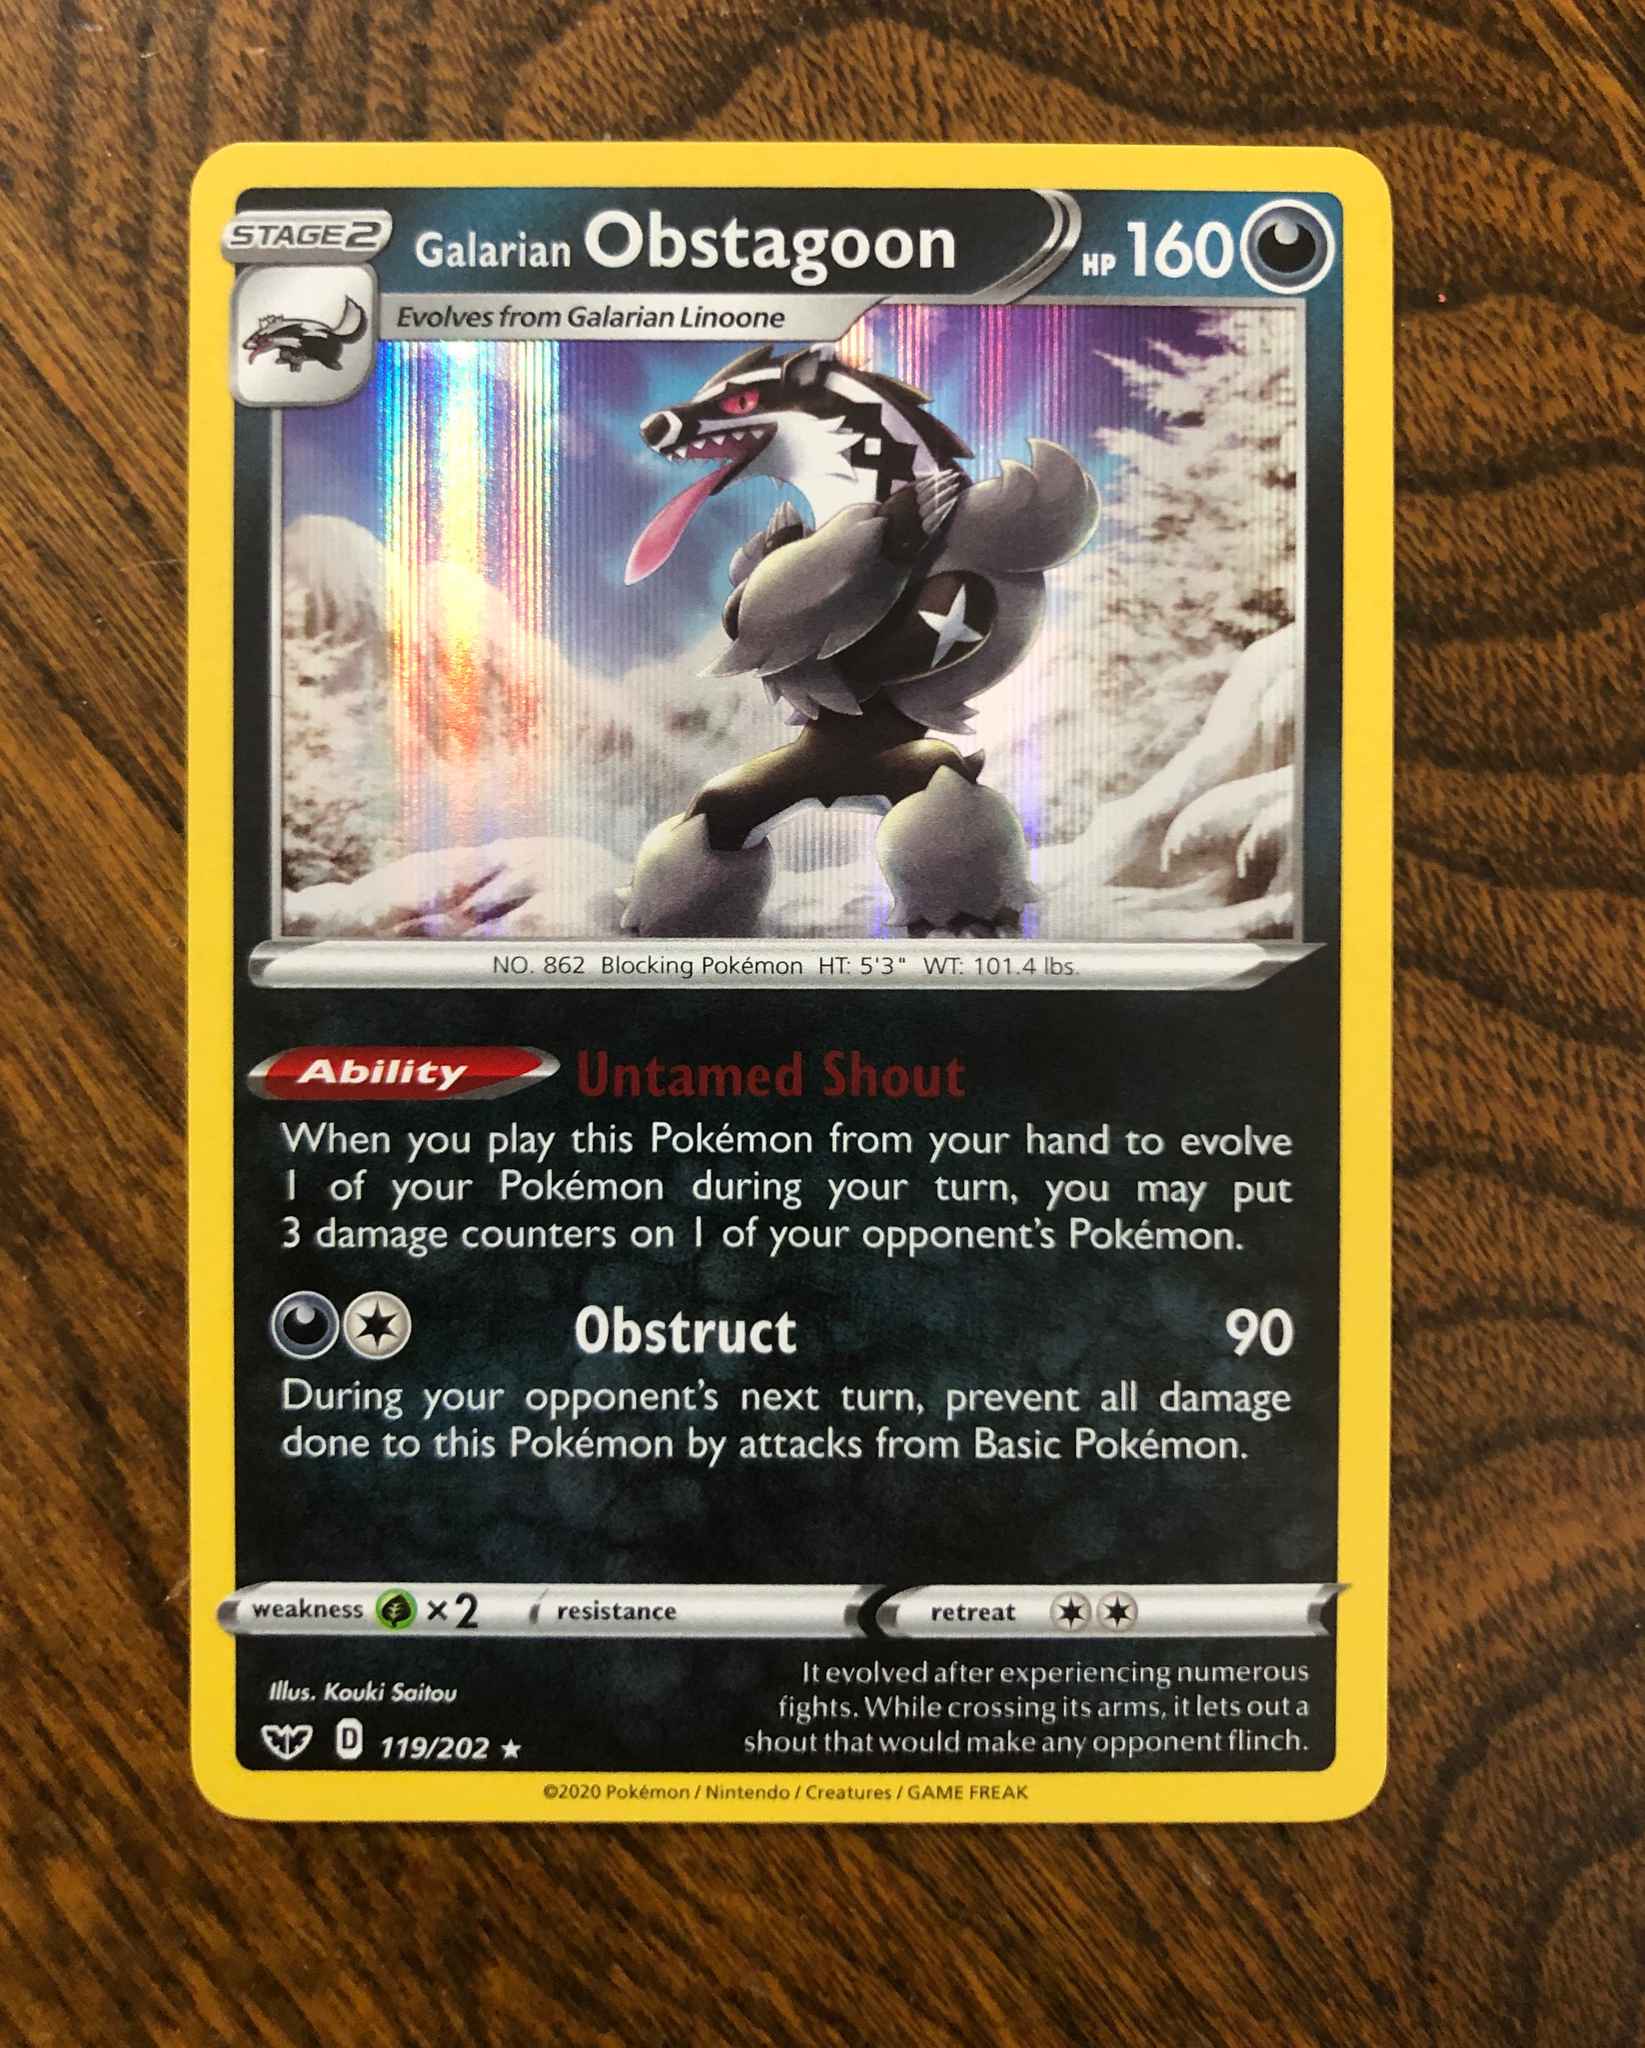 Galarian Obstagoon Holo Galarian Obstagoon Swsh01 Sword Shield Base Set Pokemon Online Gaming Store For Cards Miniatures Singles Packs Booster Boxes